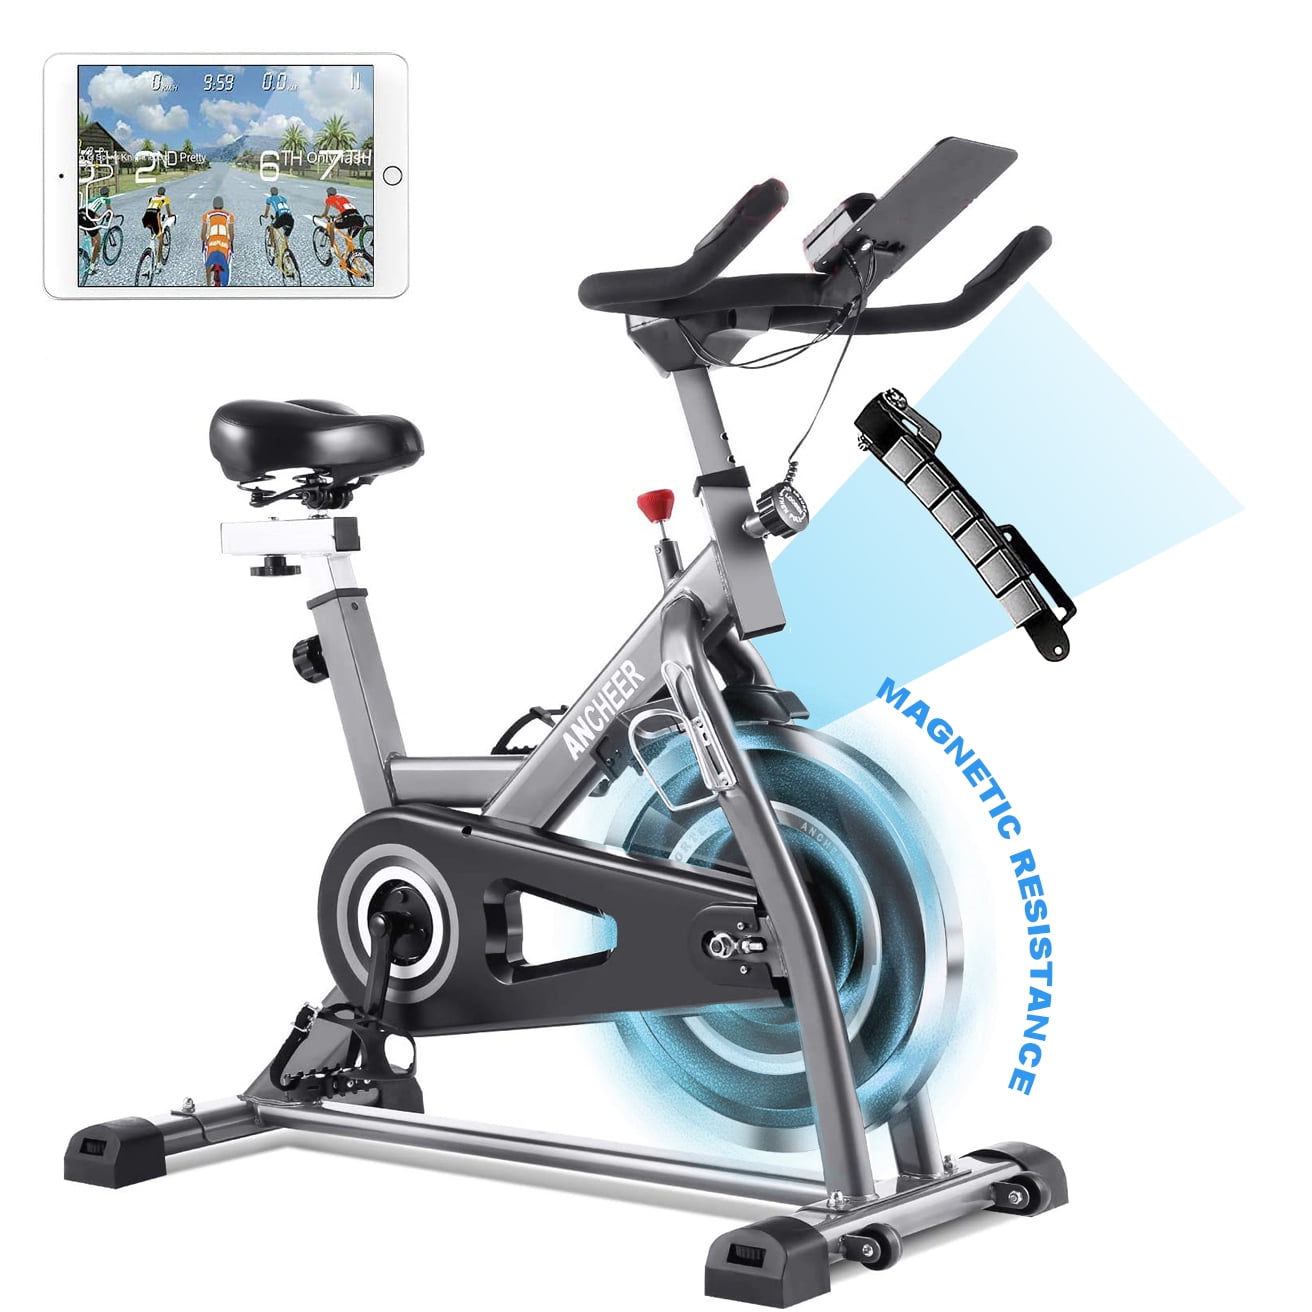 Details about   Stationary Exercise Bike Indoor Cycling Bicycle Cardio Fitness Gym Workout W/LCD 